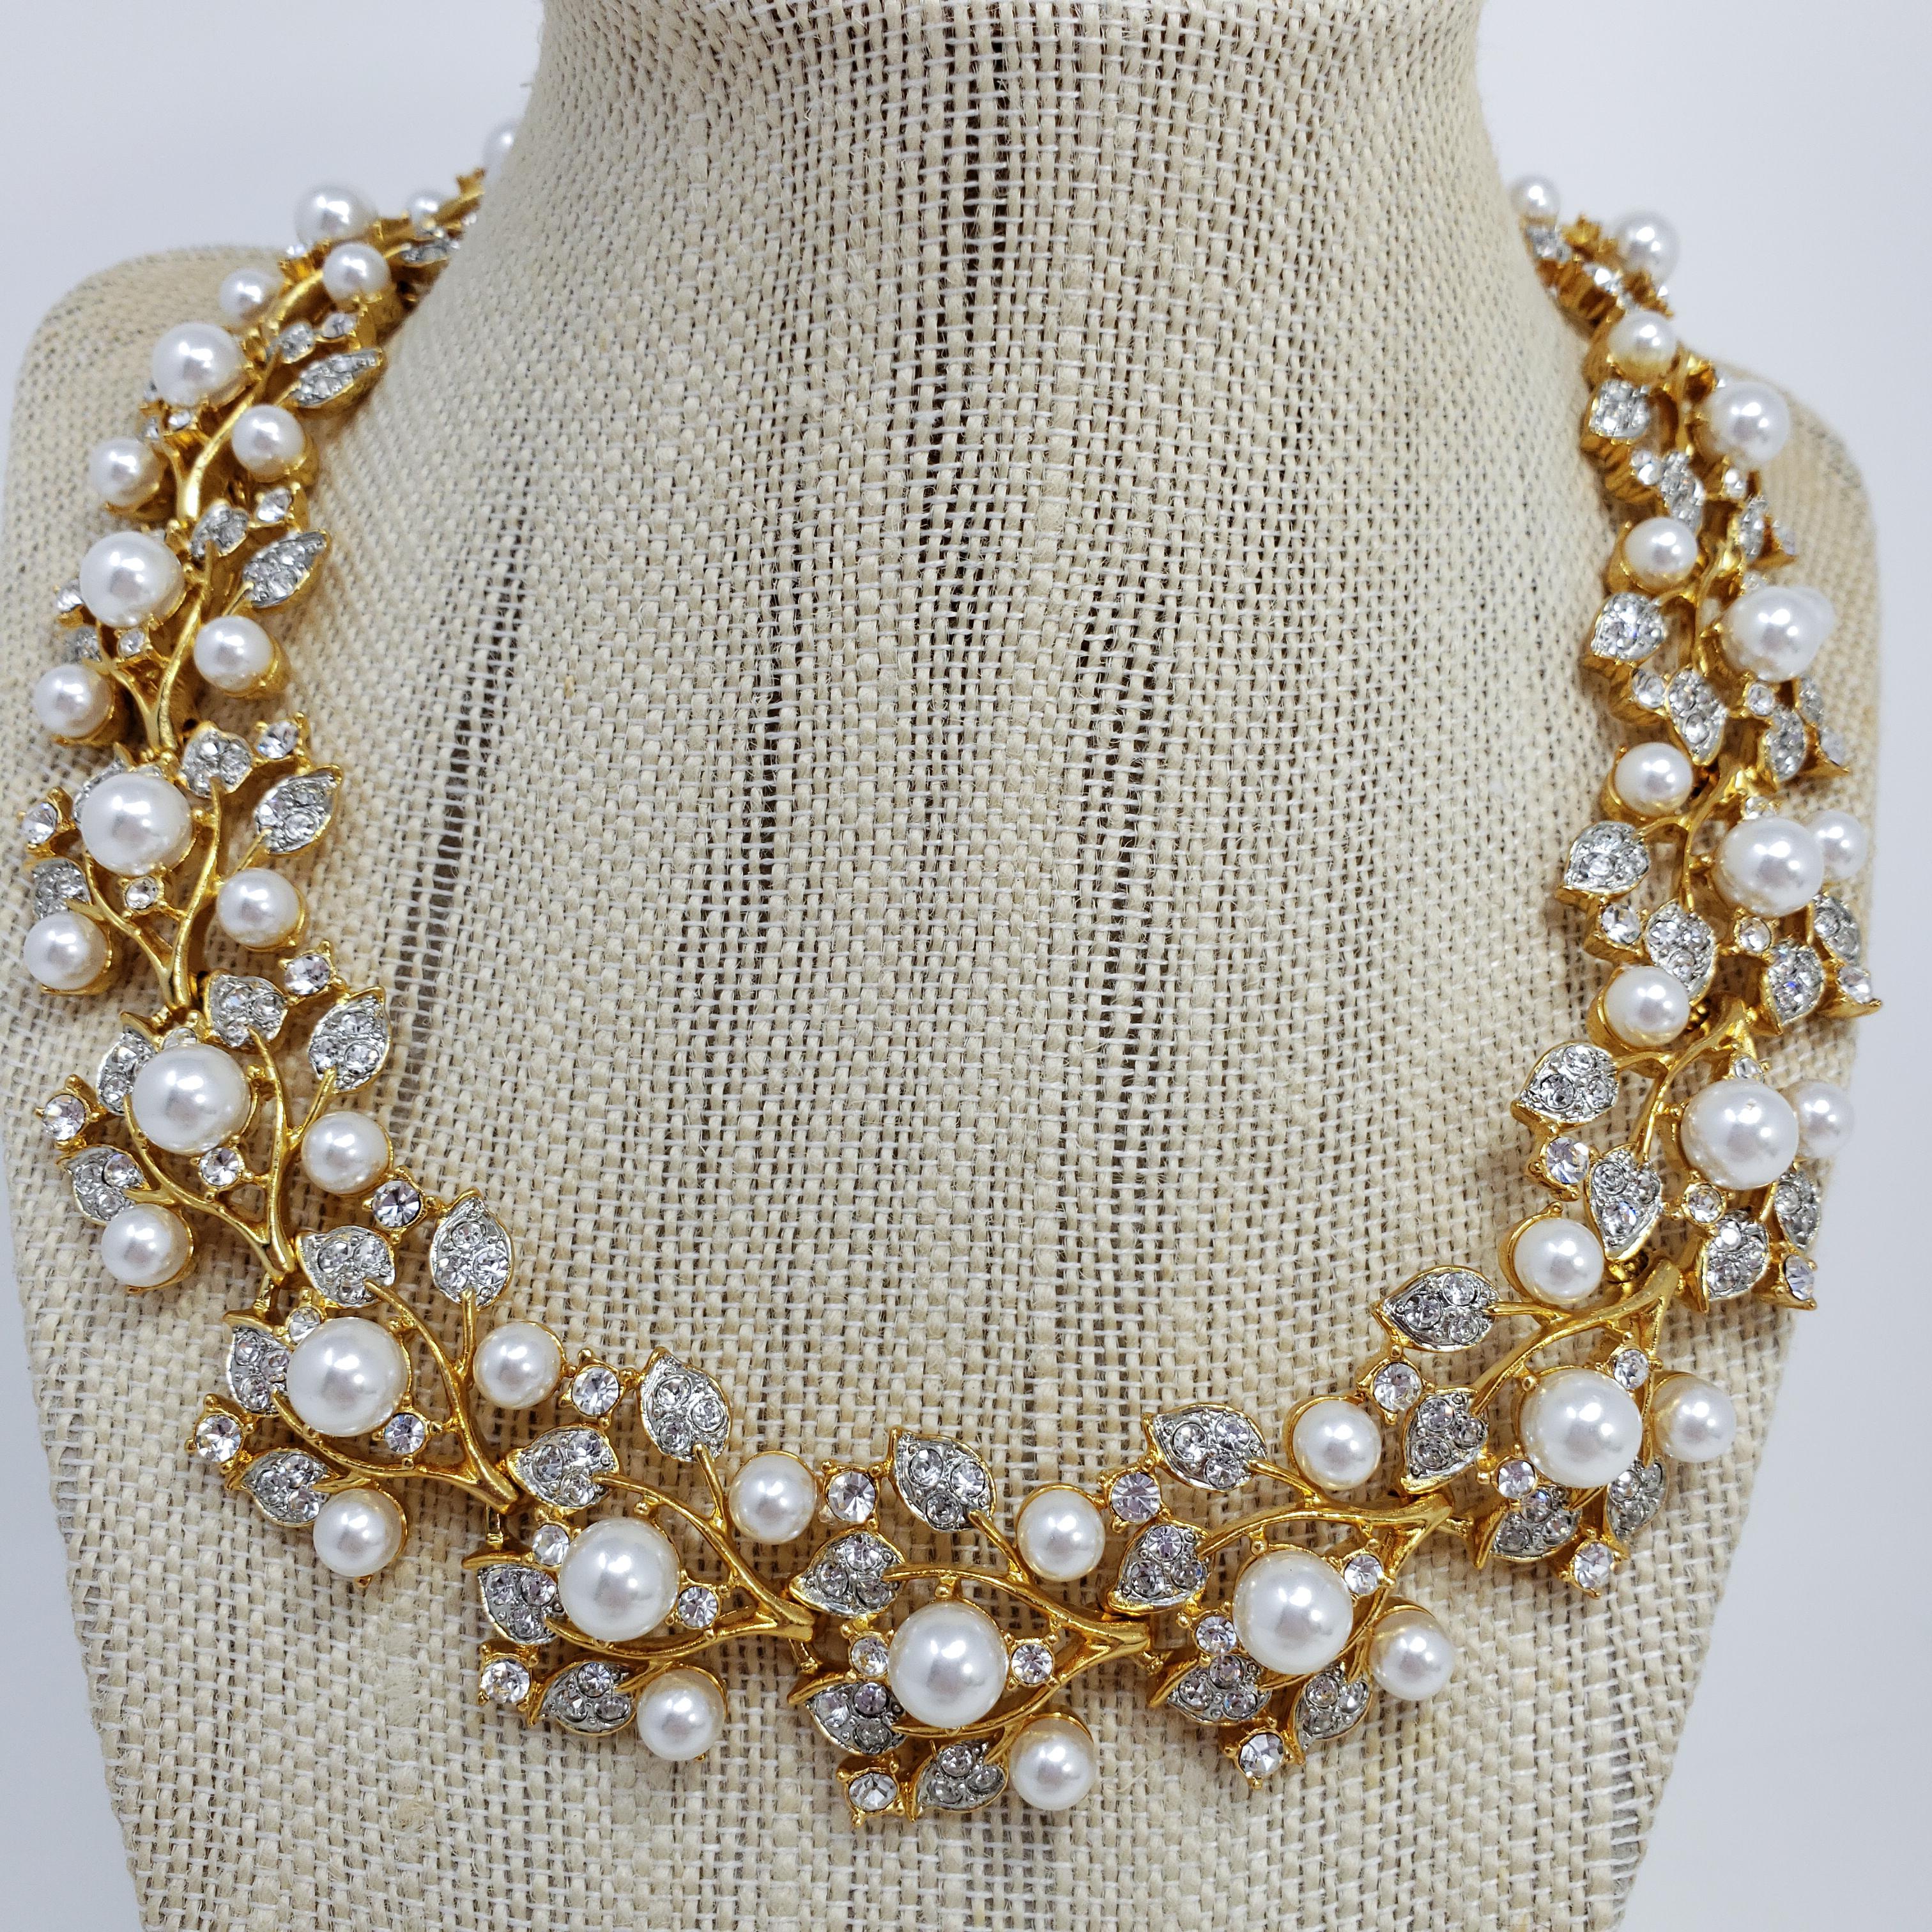 An extravagant necklace by Kenneth Jay Lane! Features flower-branch motif links, accented with clear Swarovski crystals and glass pearls. Set on gold-tone metal.

Hallmarks: Kenneth © Lane, Made in USA
Length: 46cm to 54cm (with extension chain)